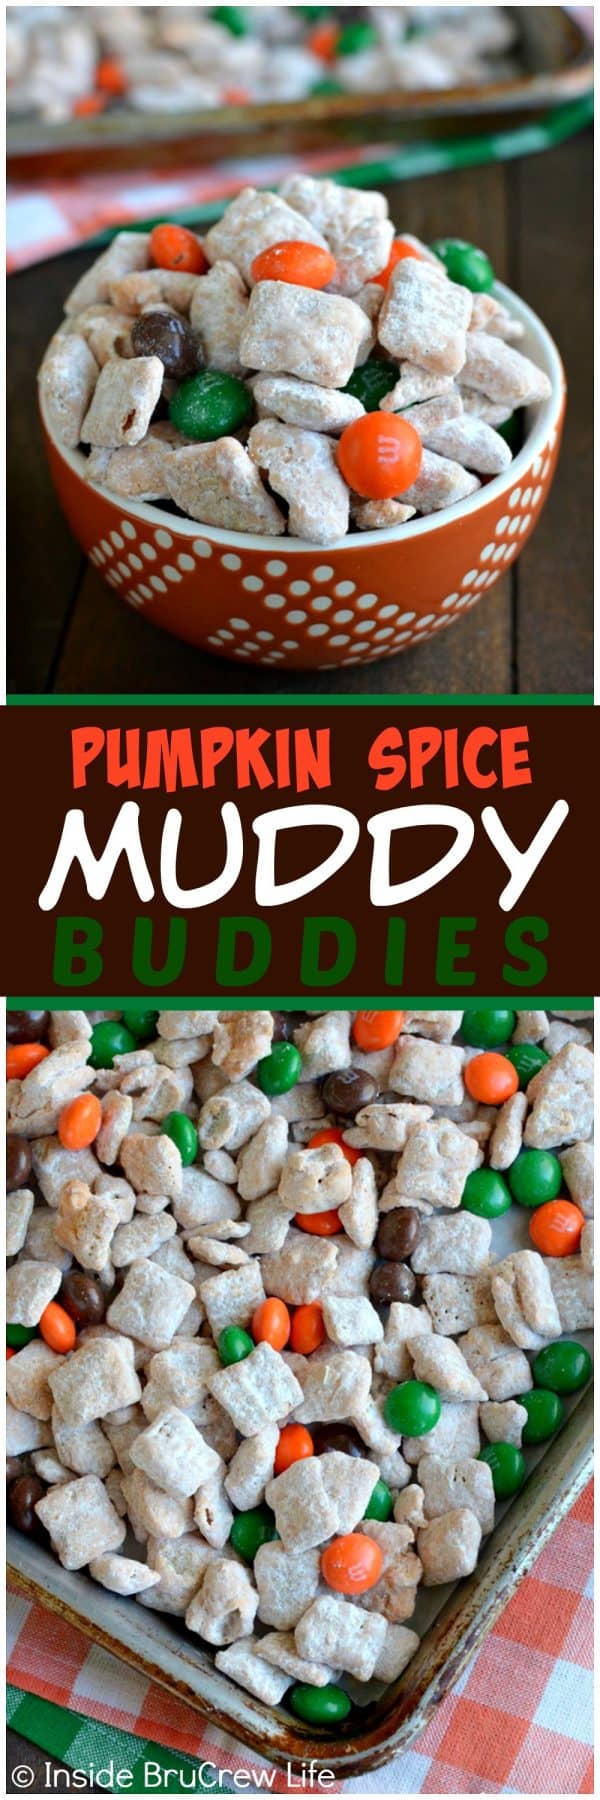 Cinnamon Pumpkin Spice Muddy Buddies - this easy snack mix is coated in pumpkin spice chocolate and has lots of fall colored candies. Great no bake recipe to make for fall parties!